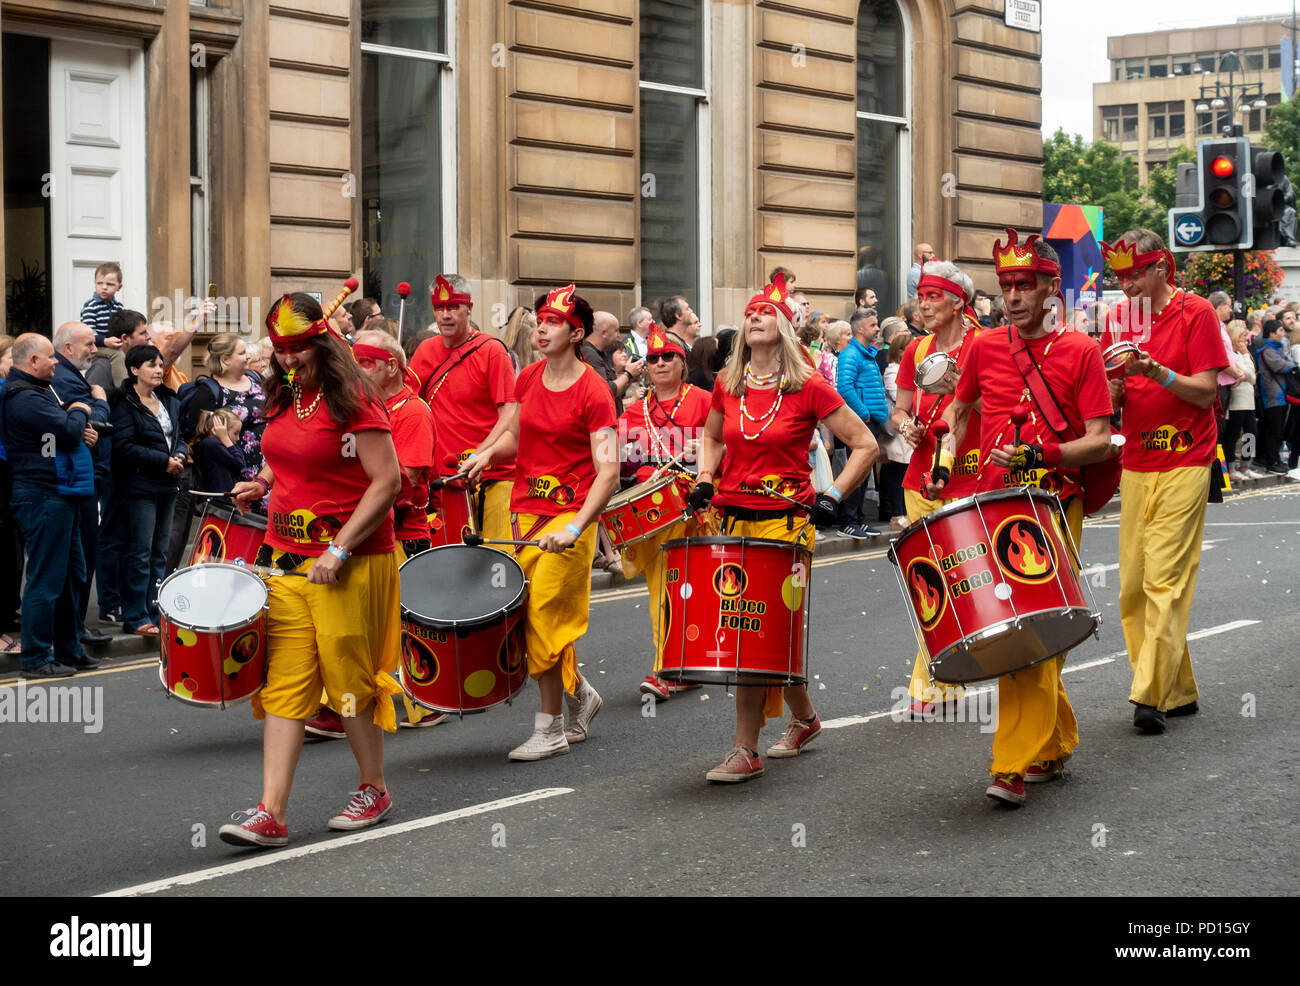 Samba band Bloco Fogo from Kent participating in the Carnival Procession of Glasgow's Merchant City Festival,.2018 Stock Photo